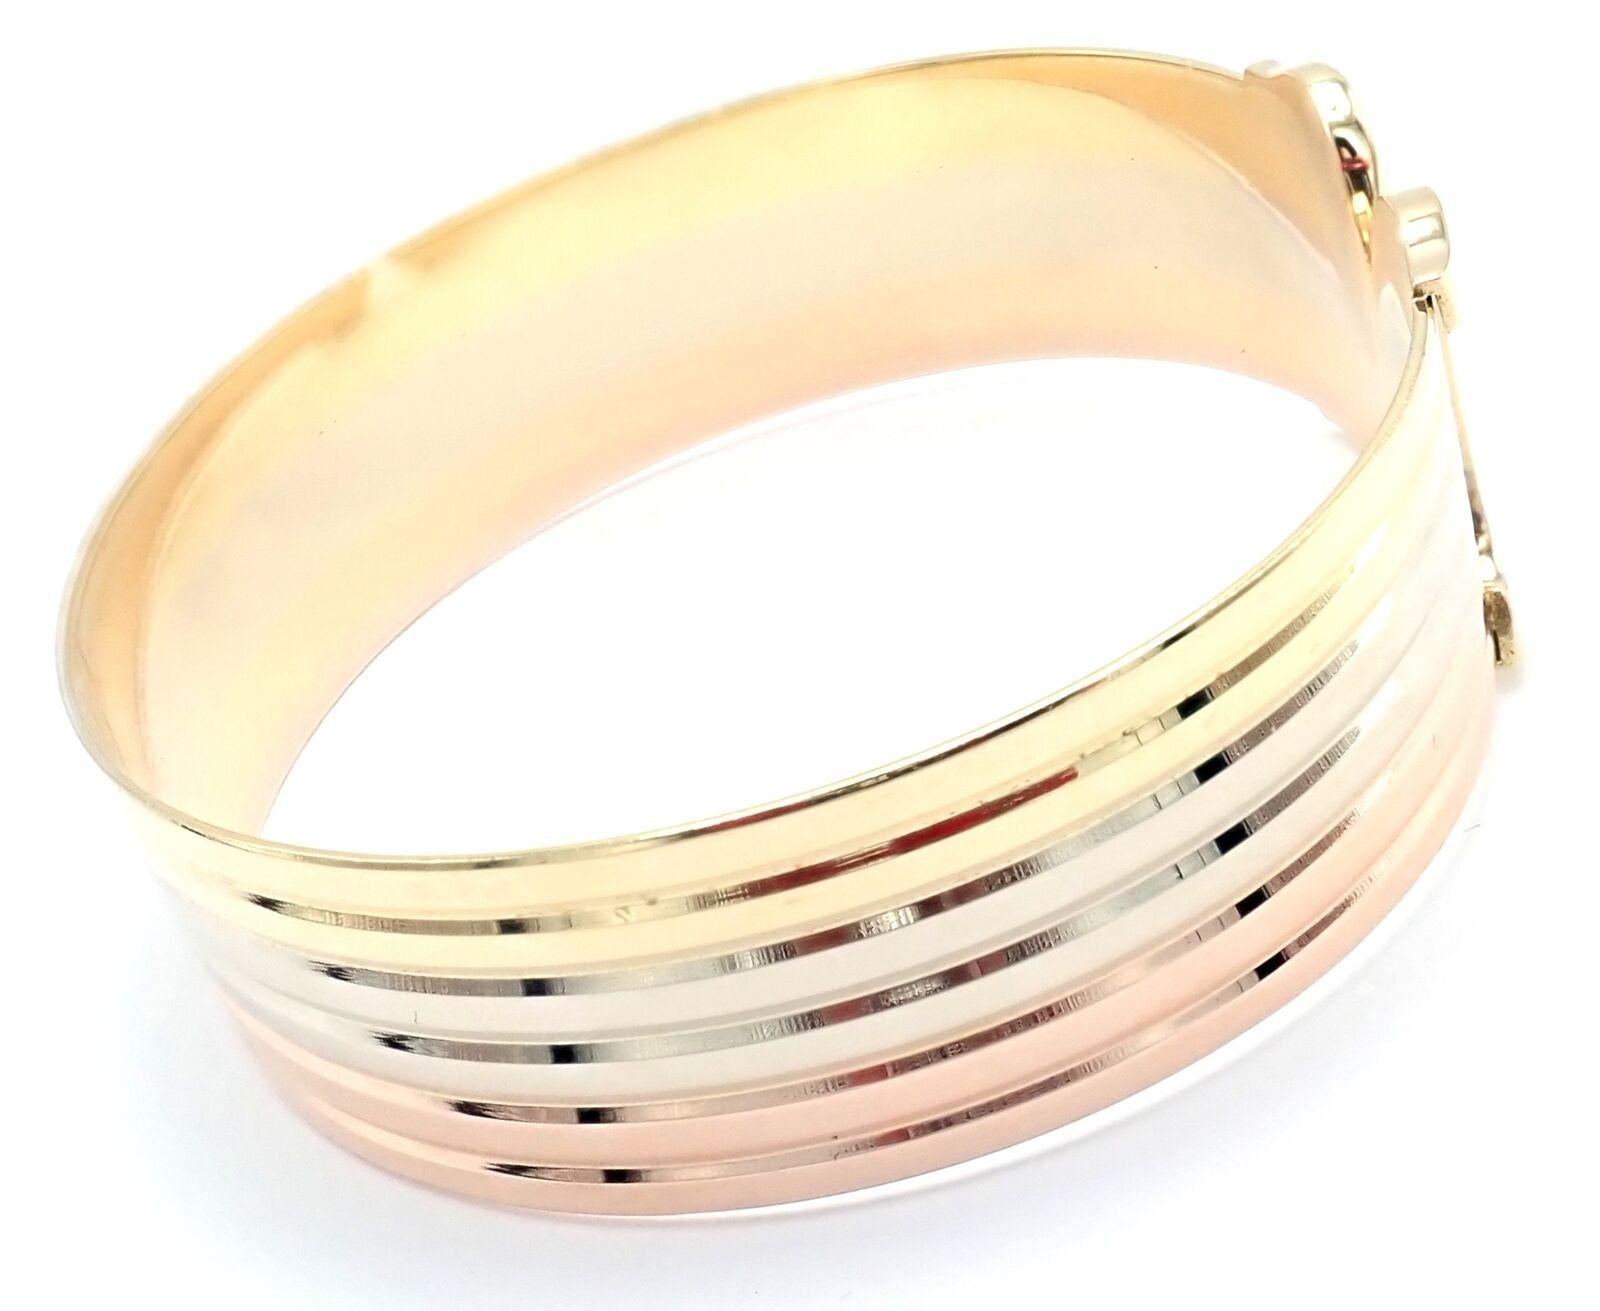 18k Tri-Color Gold (Yellow, White, Rose)  Double-C Bangle Cuff Bracelet by Cartier. 
Details: 
Weight: 34.7 grams
Length: 6 1/2